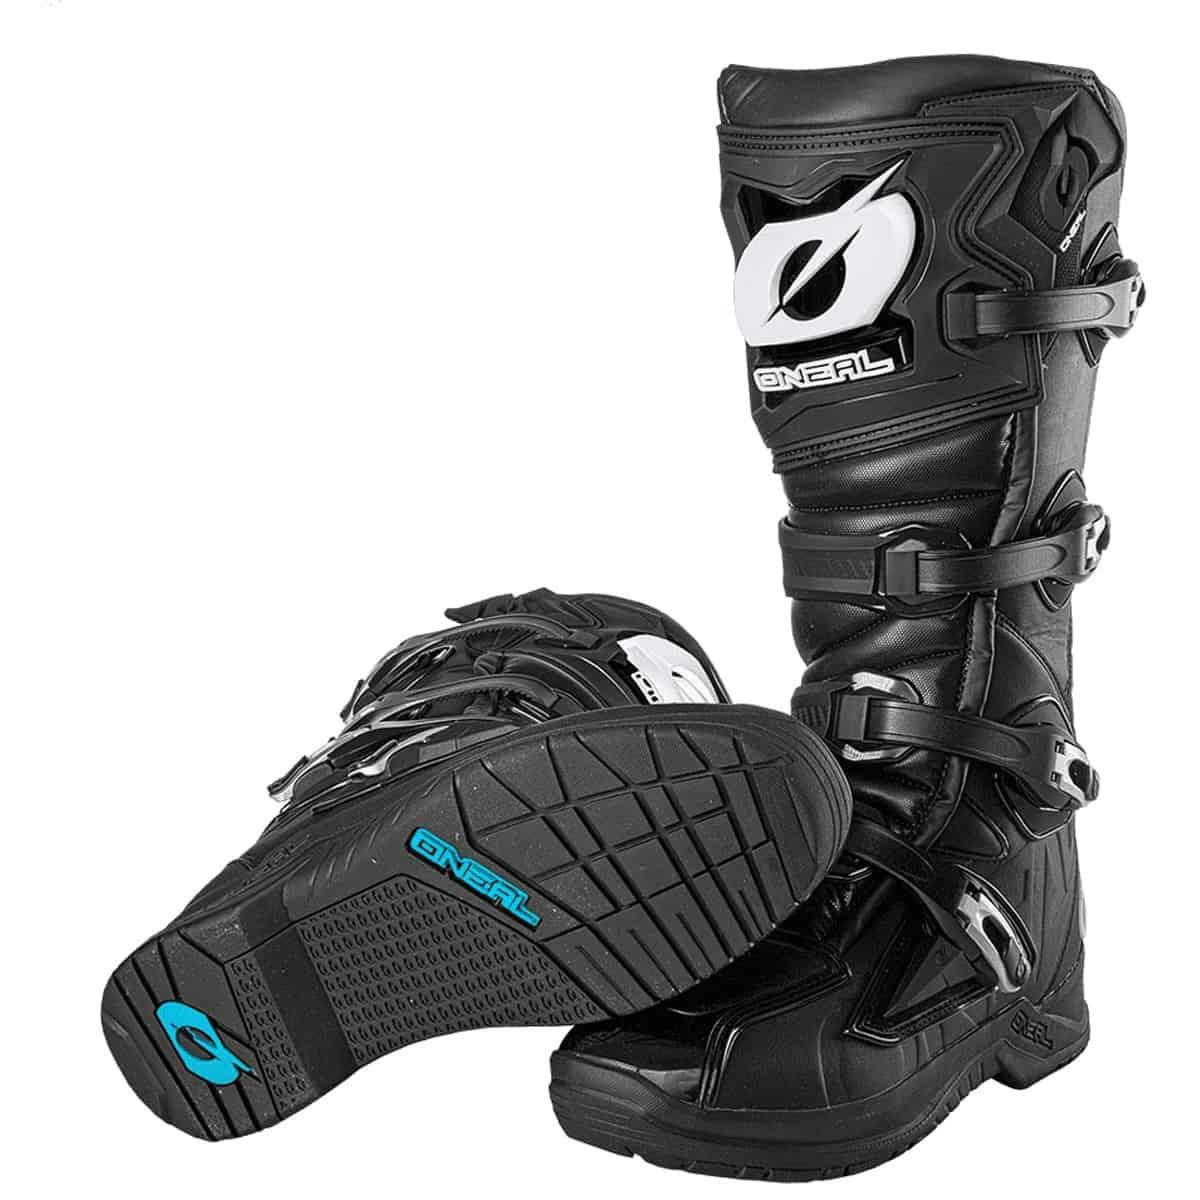 Based on the classic Rider boot, this new version offers even more protection and an updated look.-black-3